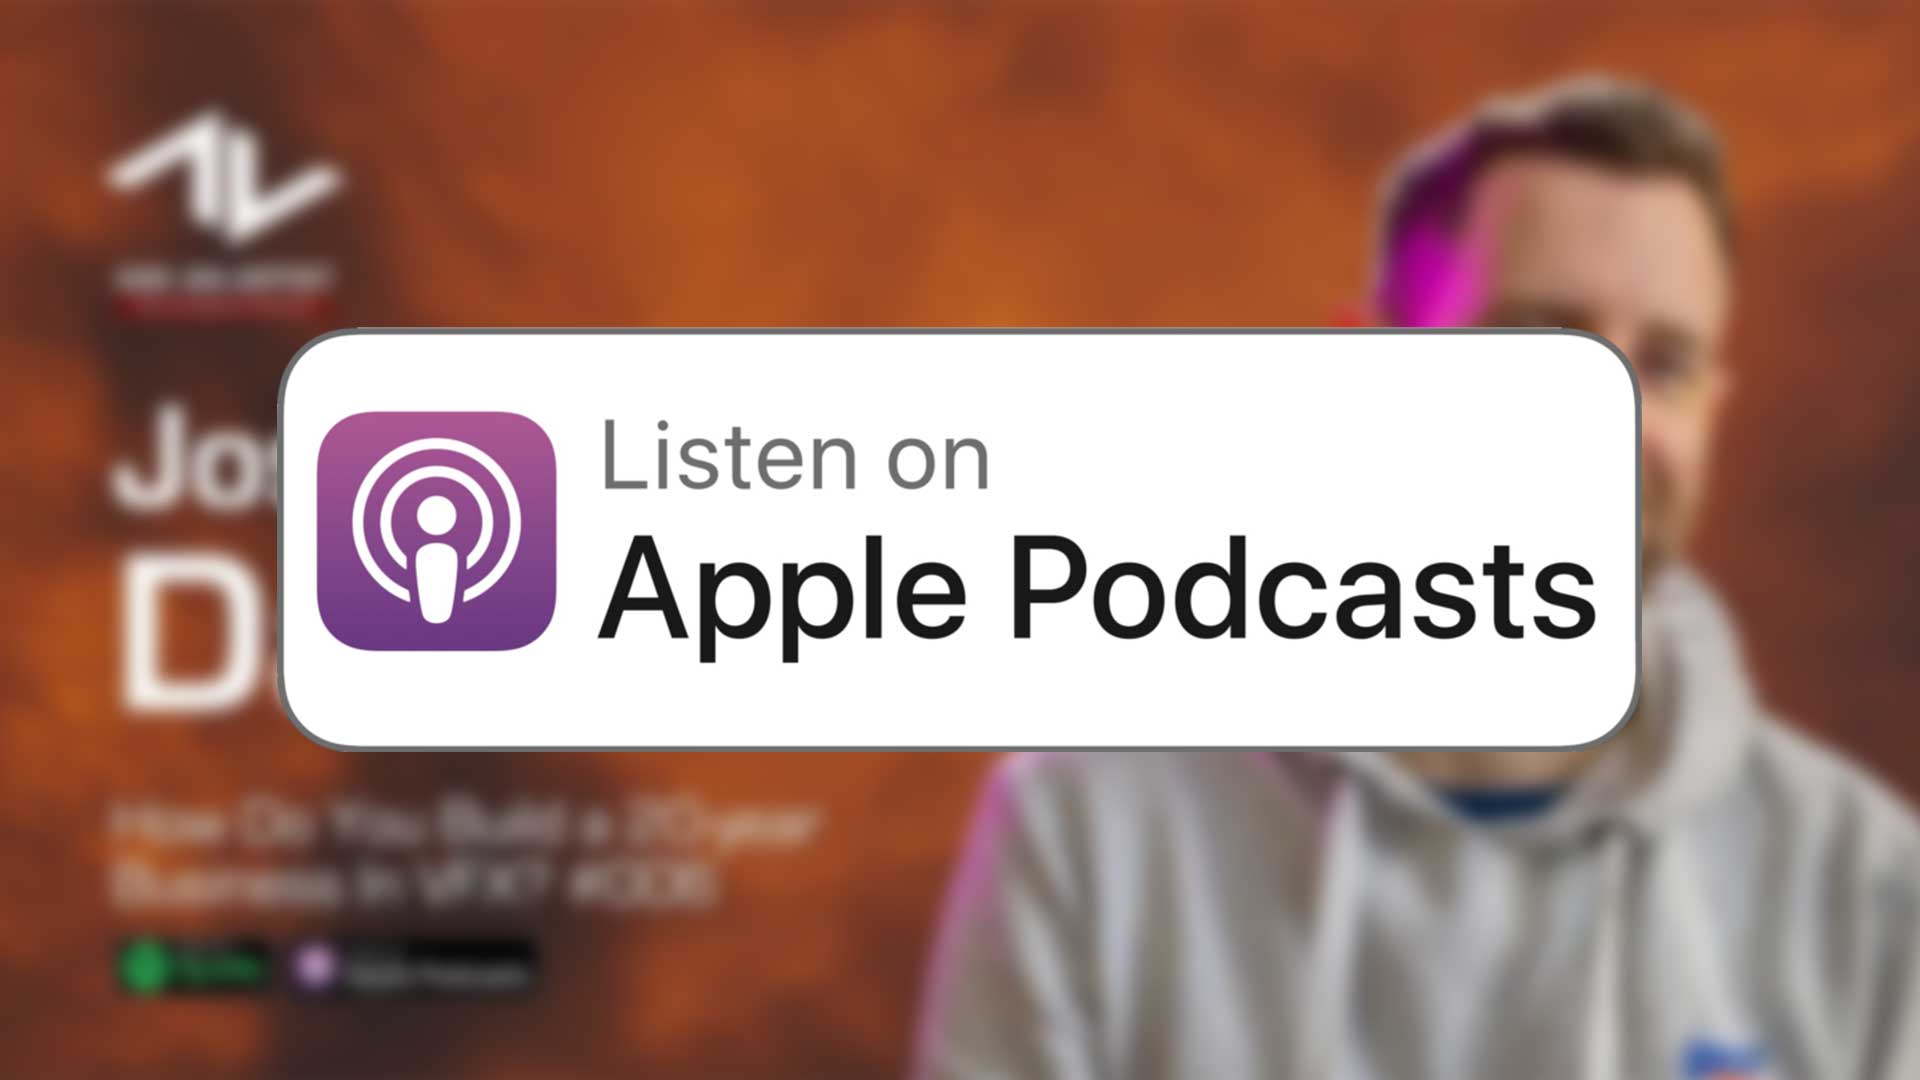 Listen to episode 6 of Ask An Artist on Apple Podcasts.